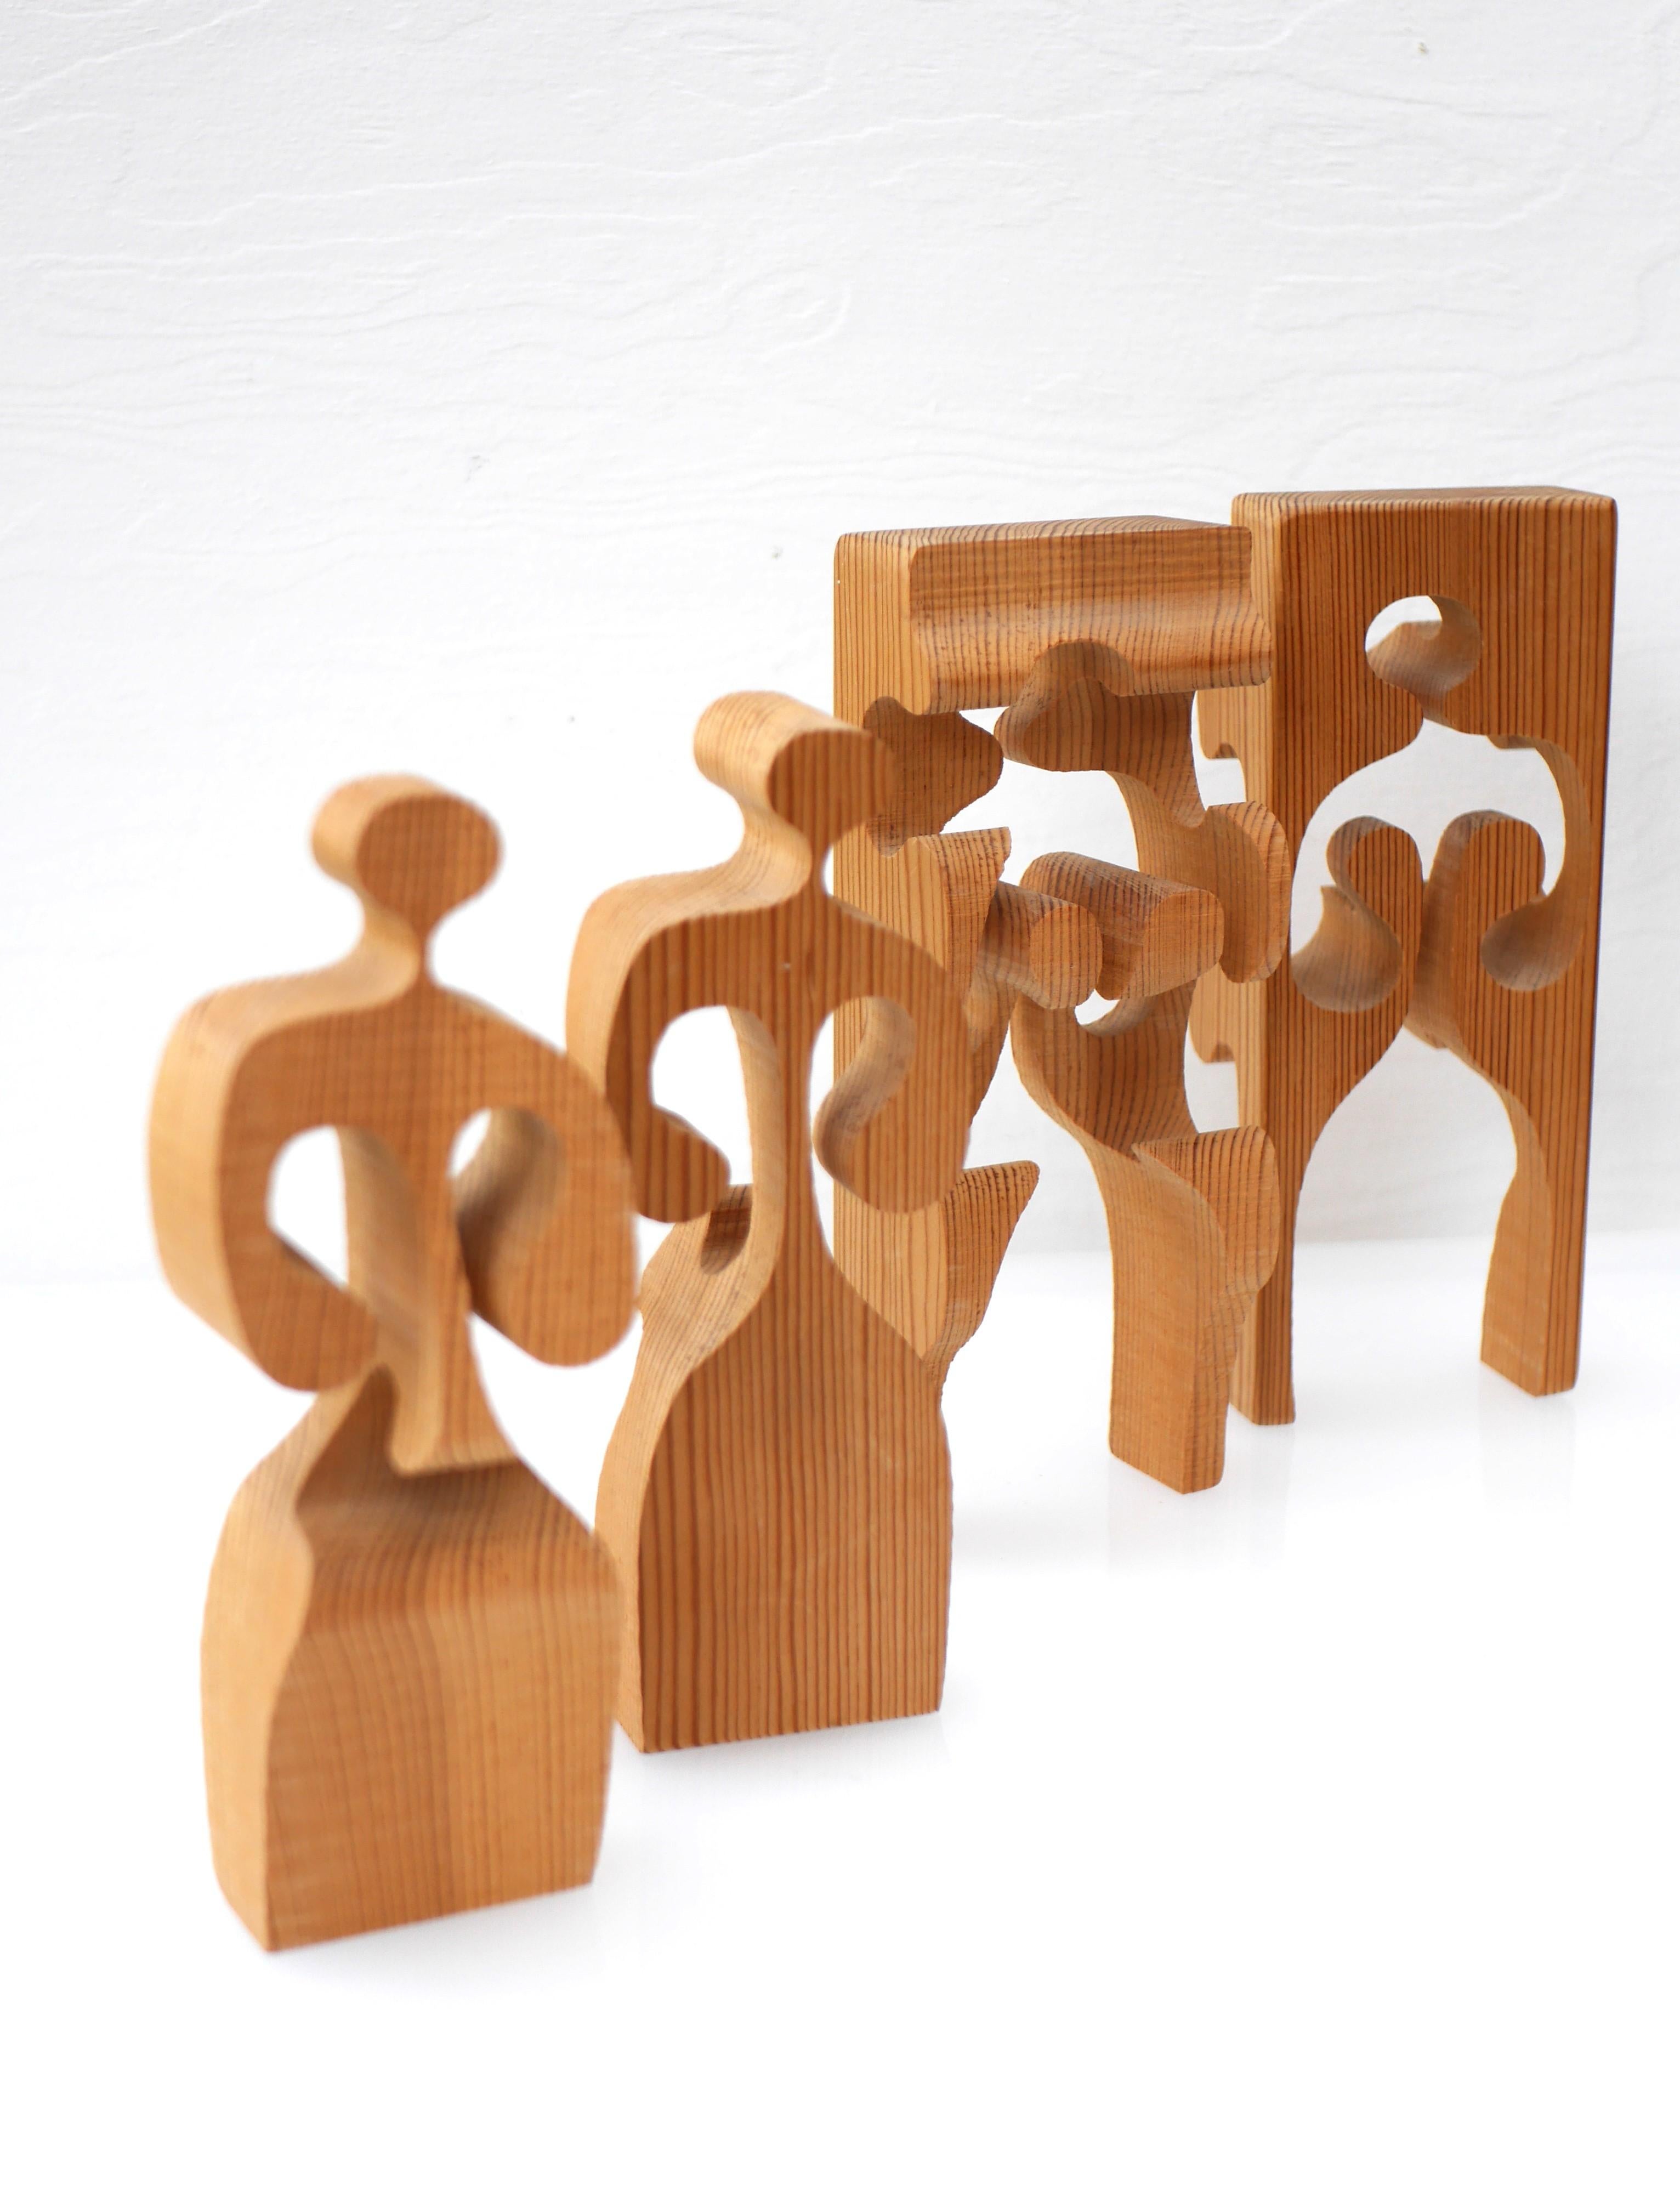 Wooden Puzzle Sculpture by Gunnar Kanevad for Gamla Linköping Sweden, 1962 For Sale 3